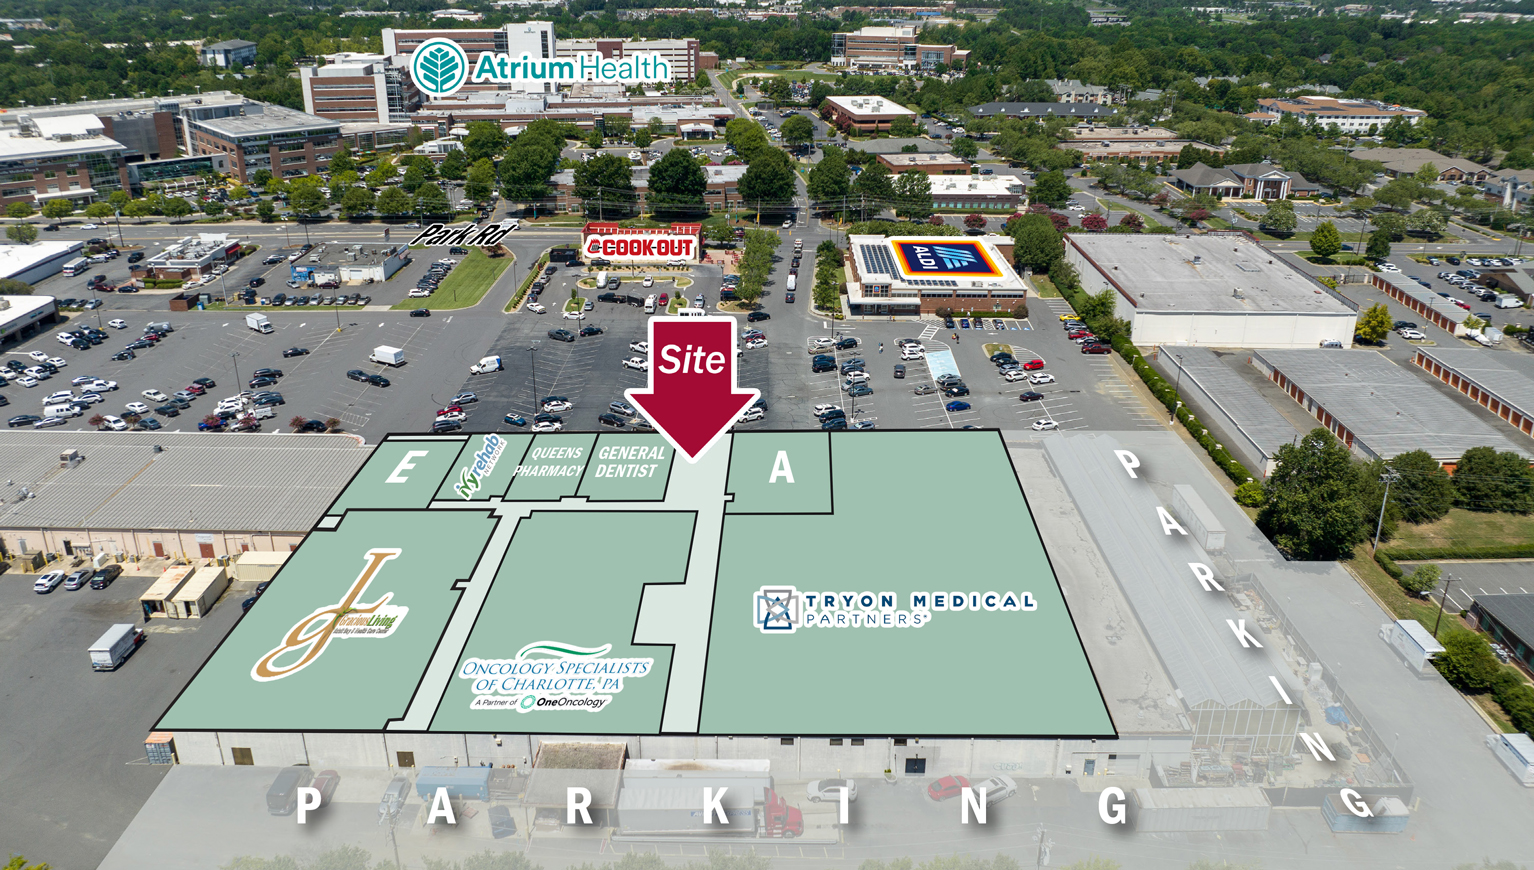 Aerial of commercial center with overlay listing tenants